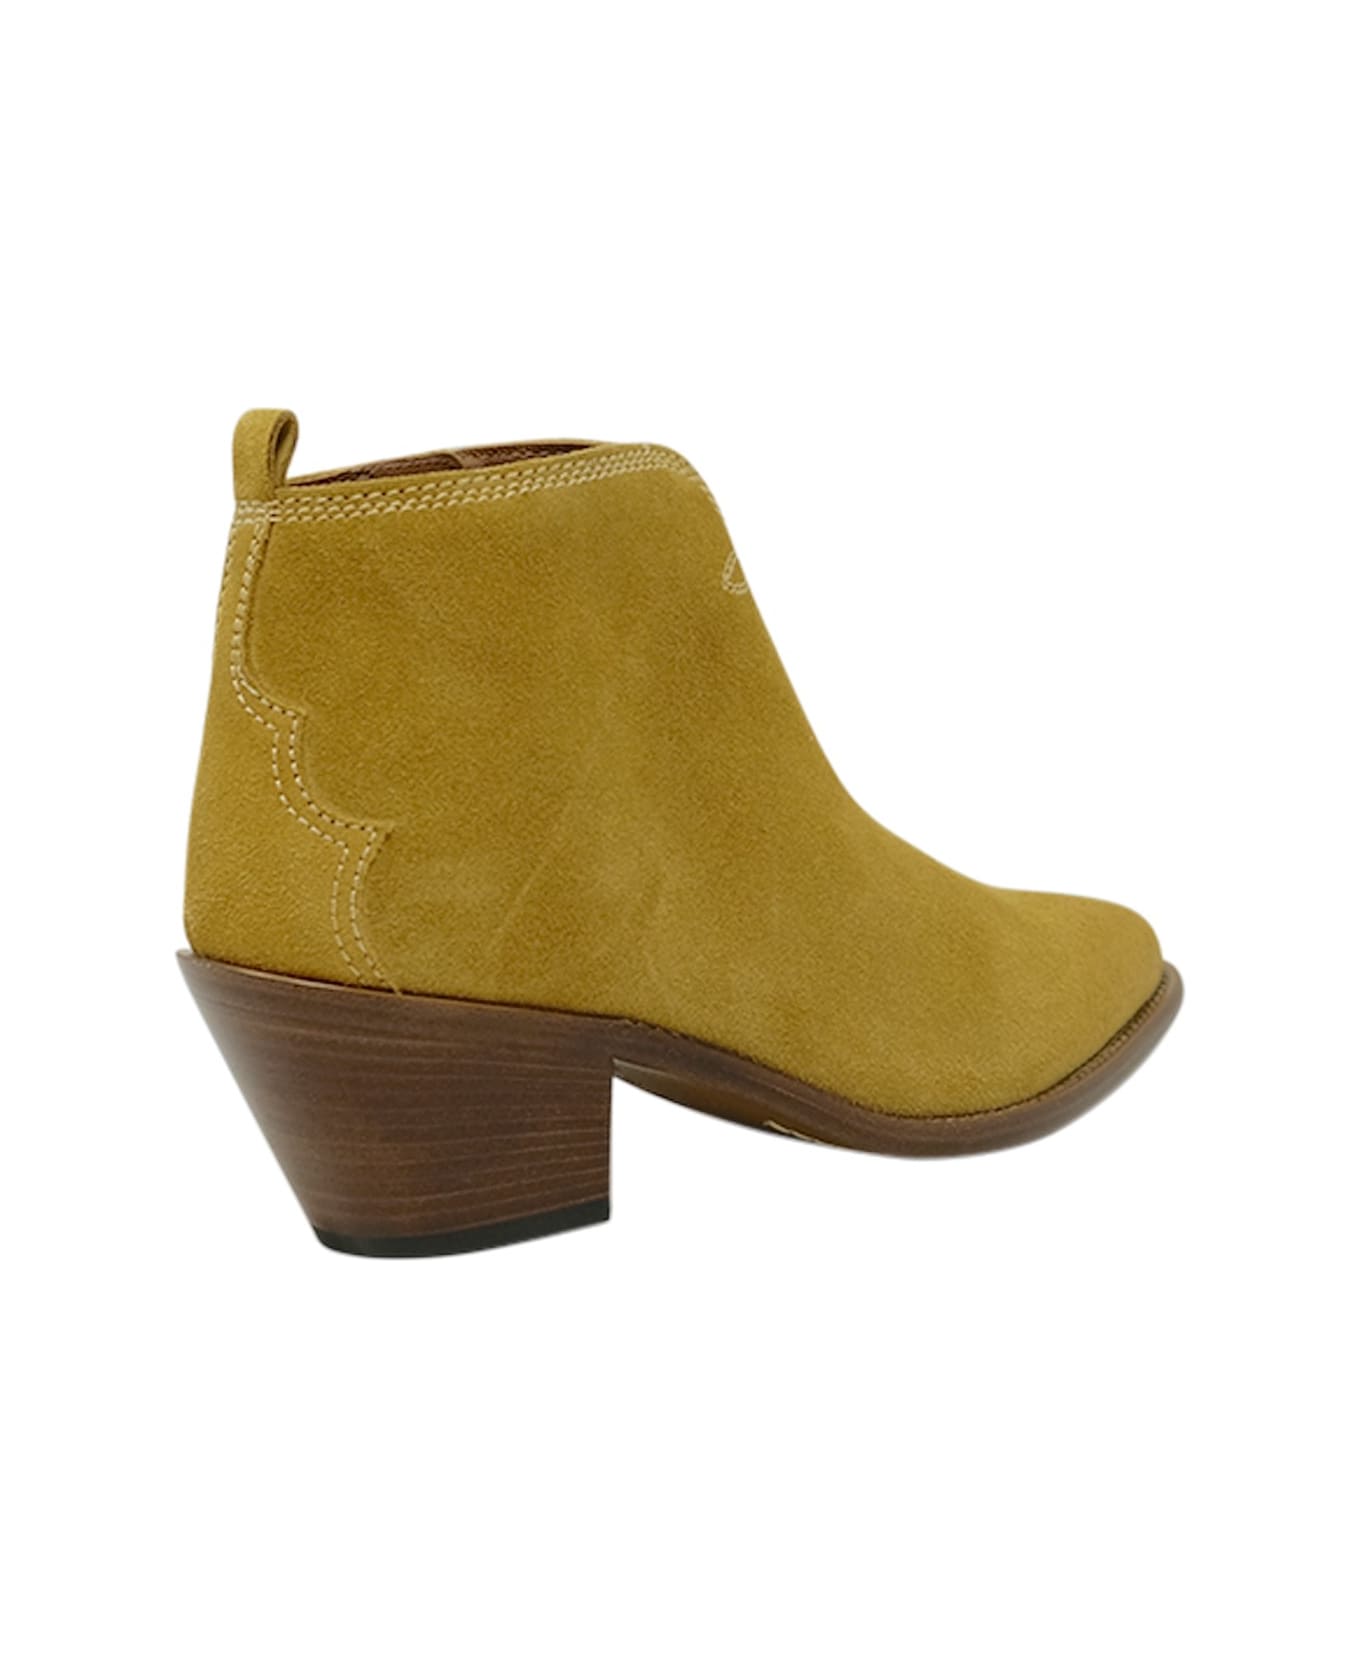 Sartore Suede Beige Ankle Boots